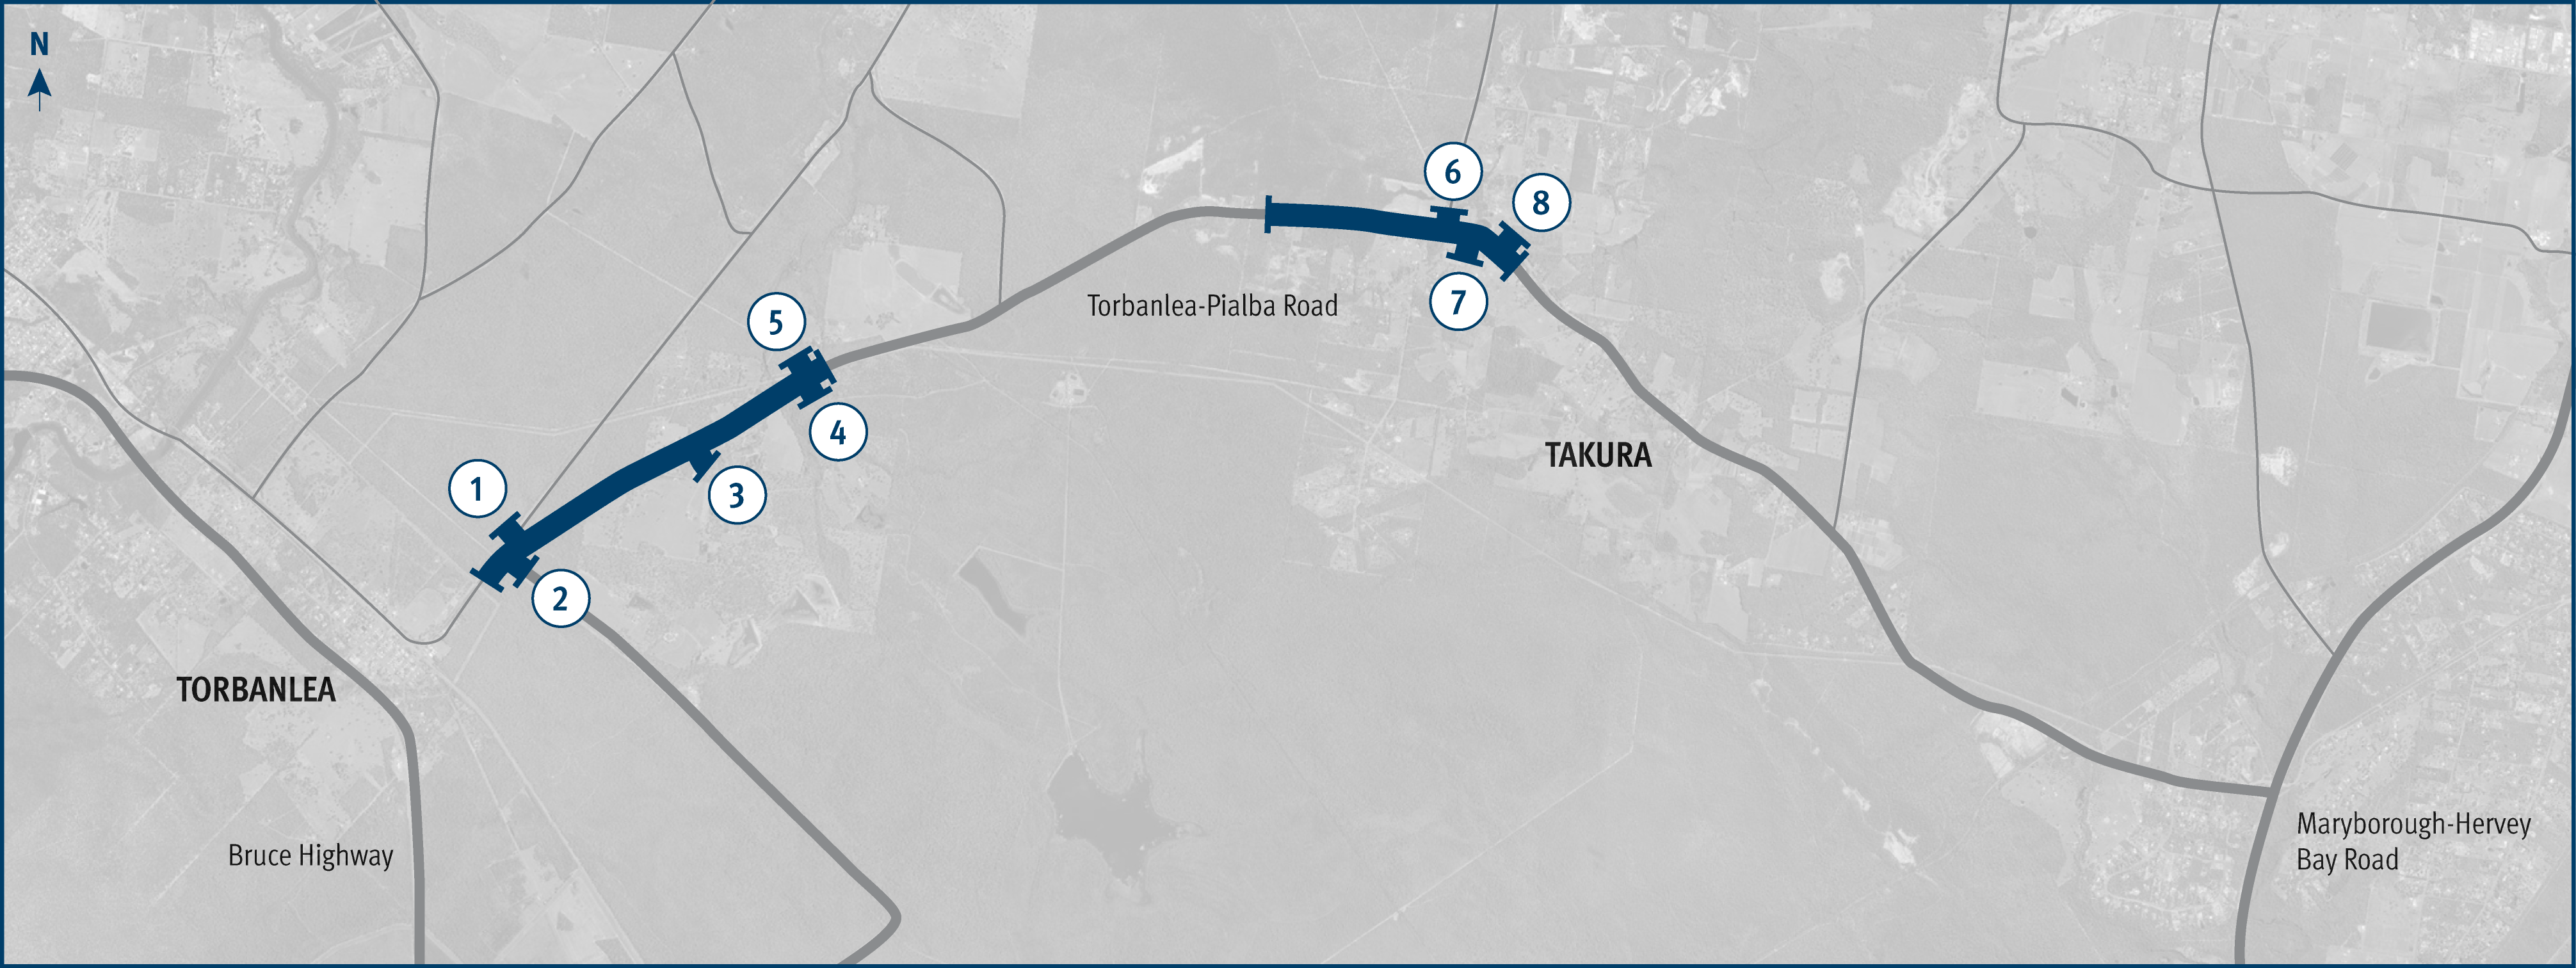 map with numbers indicating location of work.  1.	Old Toogoom Road intersection 2.	Churchill Mine Road intersection 3.	Antill Road intersection 4.	Grabbes Road intersection 5.	Gear Road intersection 6.	Toogoom Cane Road intersection 7.	Sanctuary Hills Road intersection 8.	Simmos Road intersection.